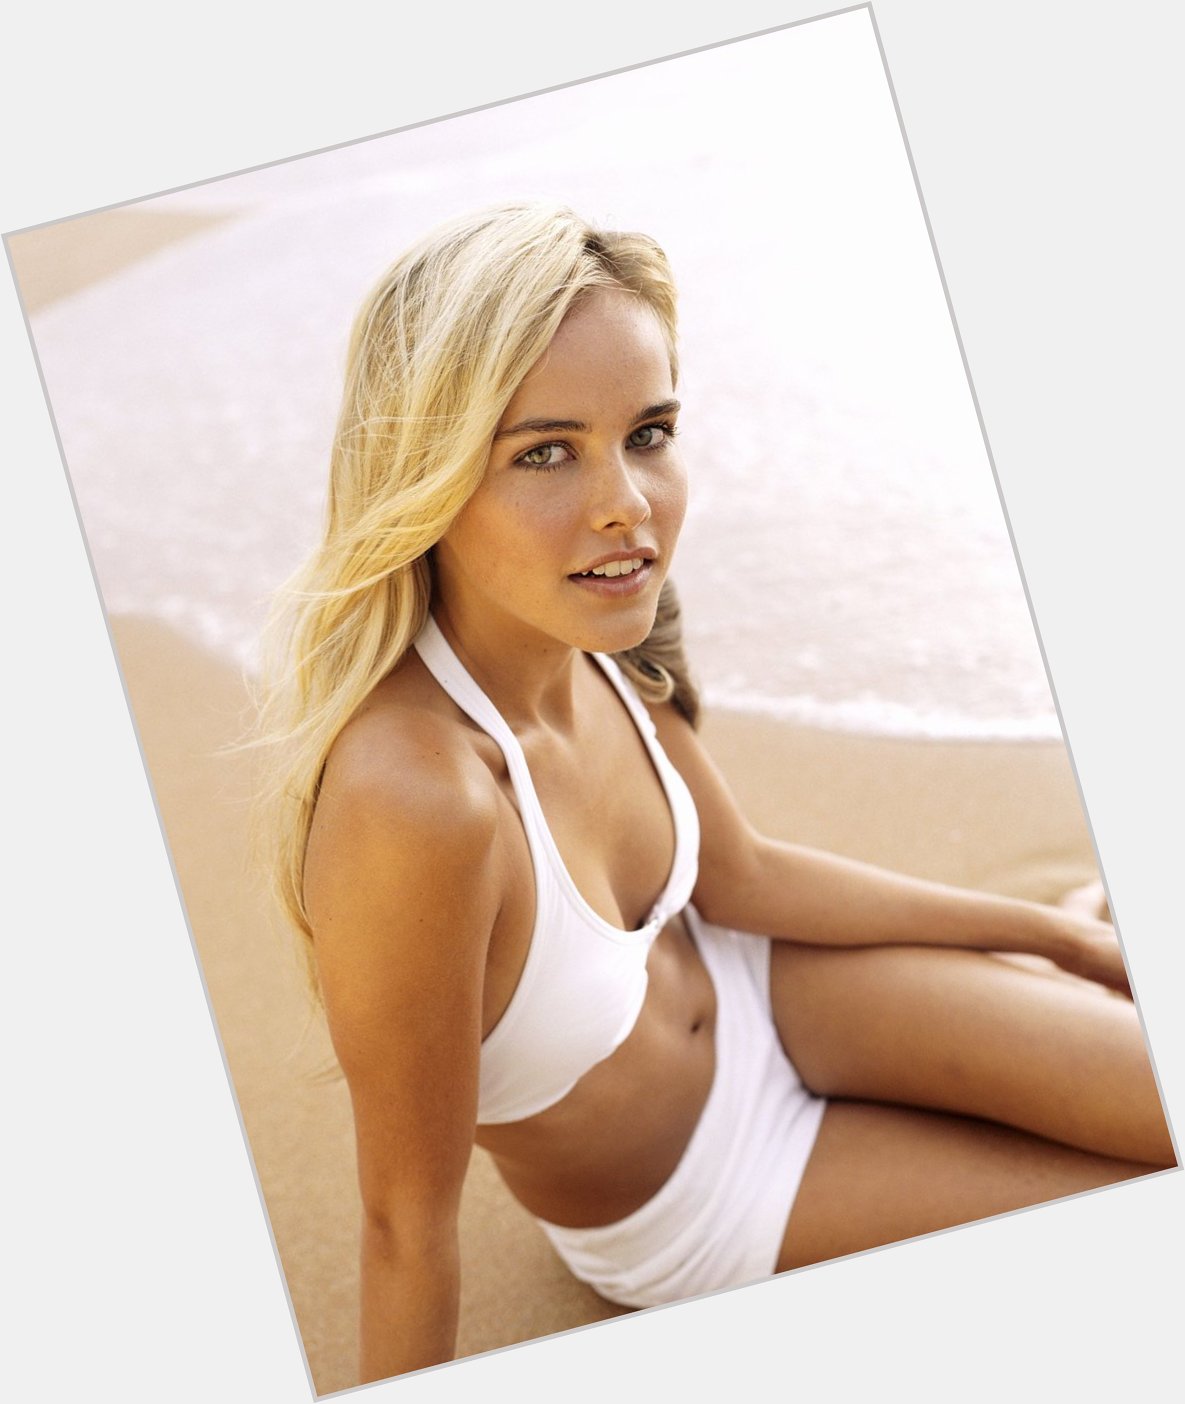 Happy birthday to my favorite Australian actress, the gorgeous Isabel Lucas! 